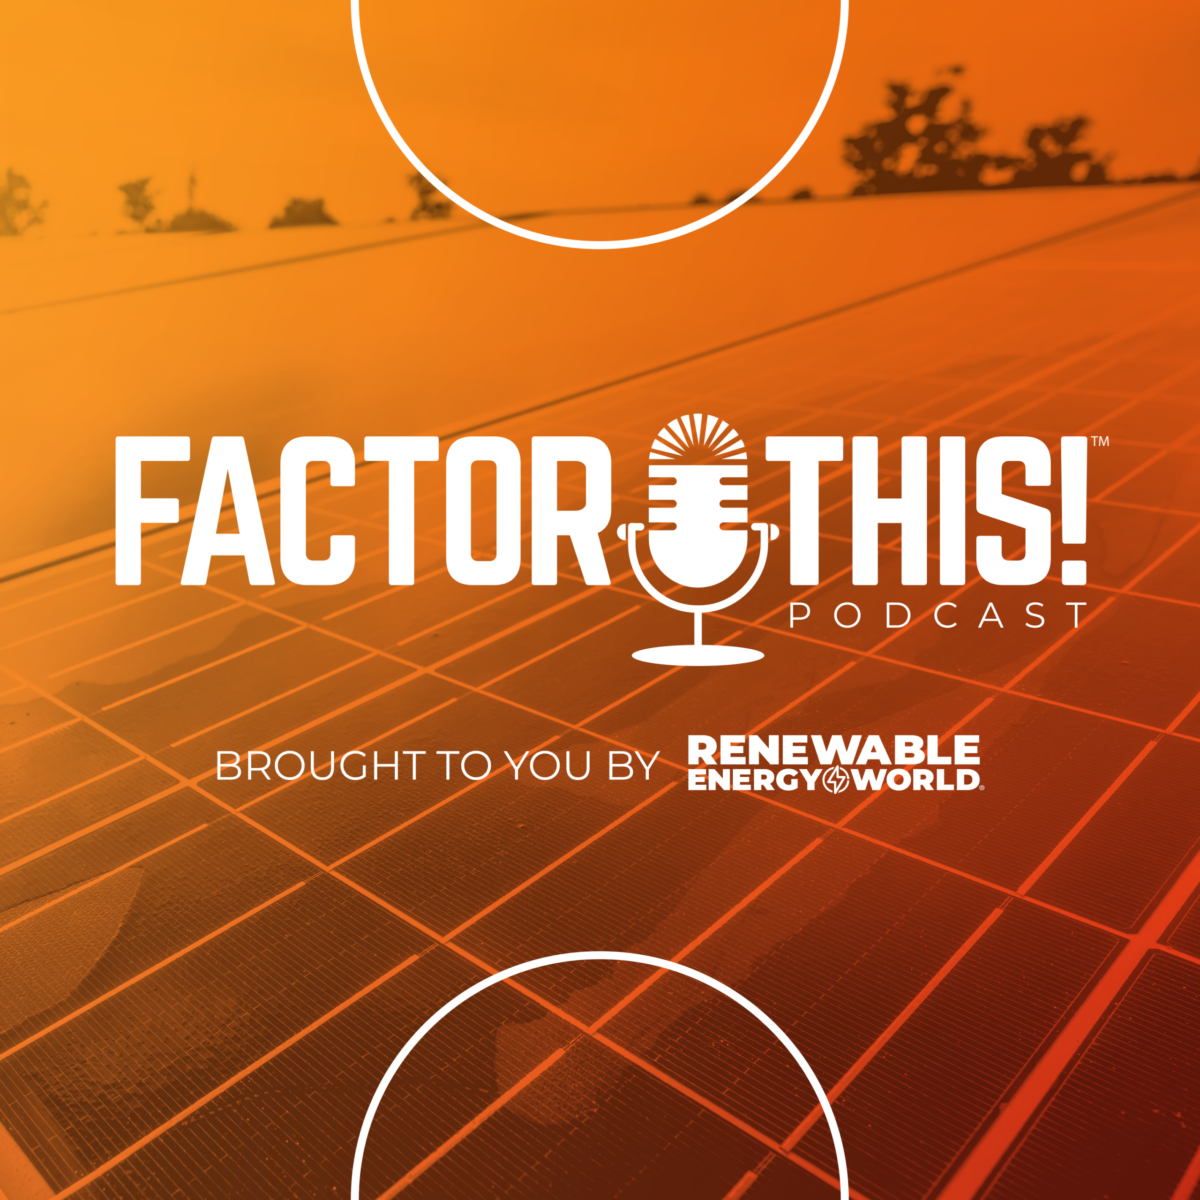 Factor This! episode list— a podcast for the solar energy industry